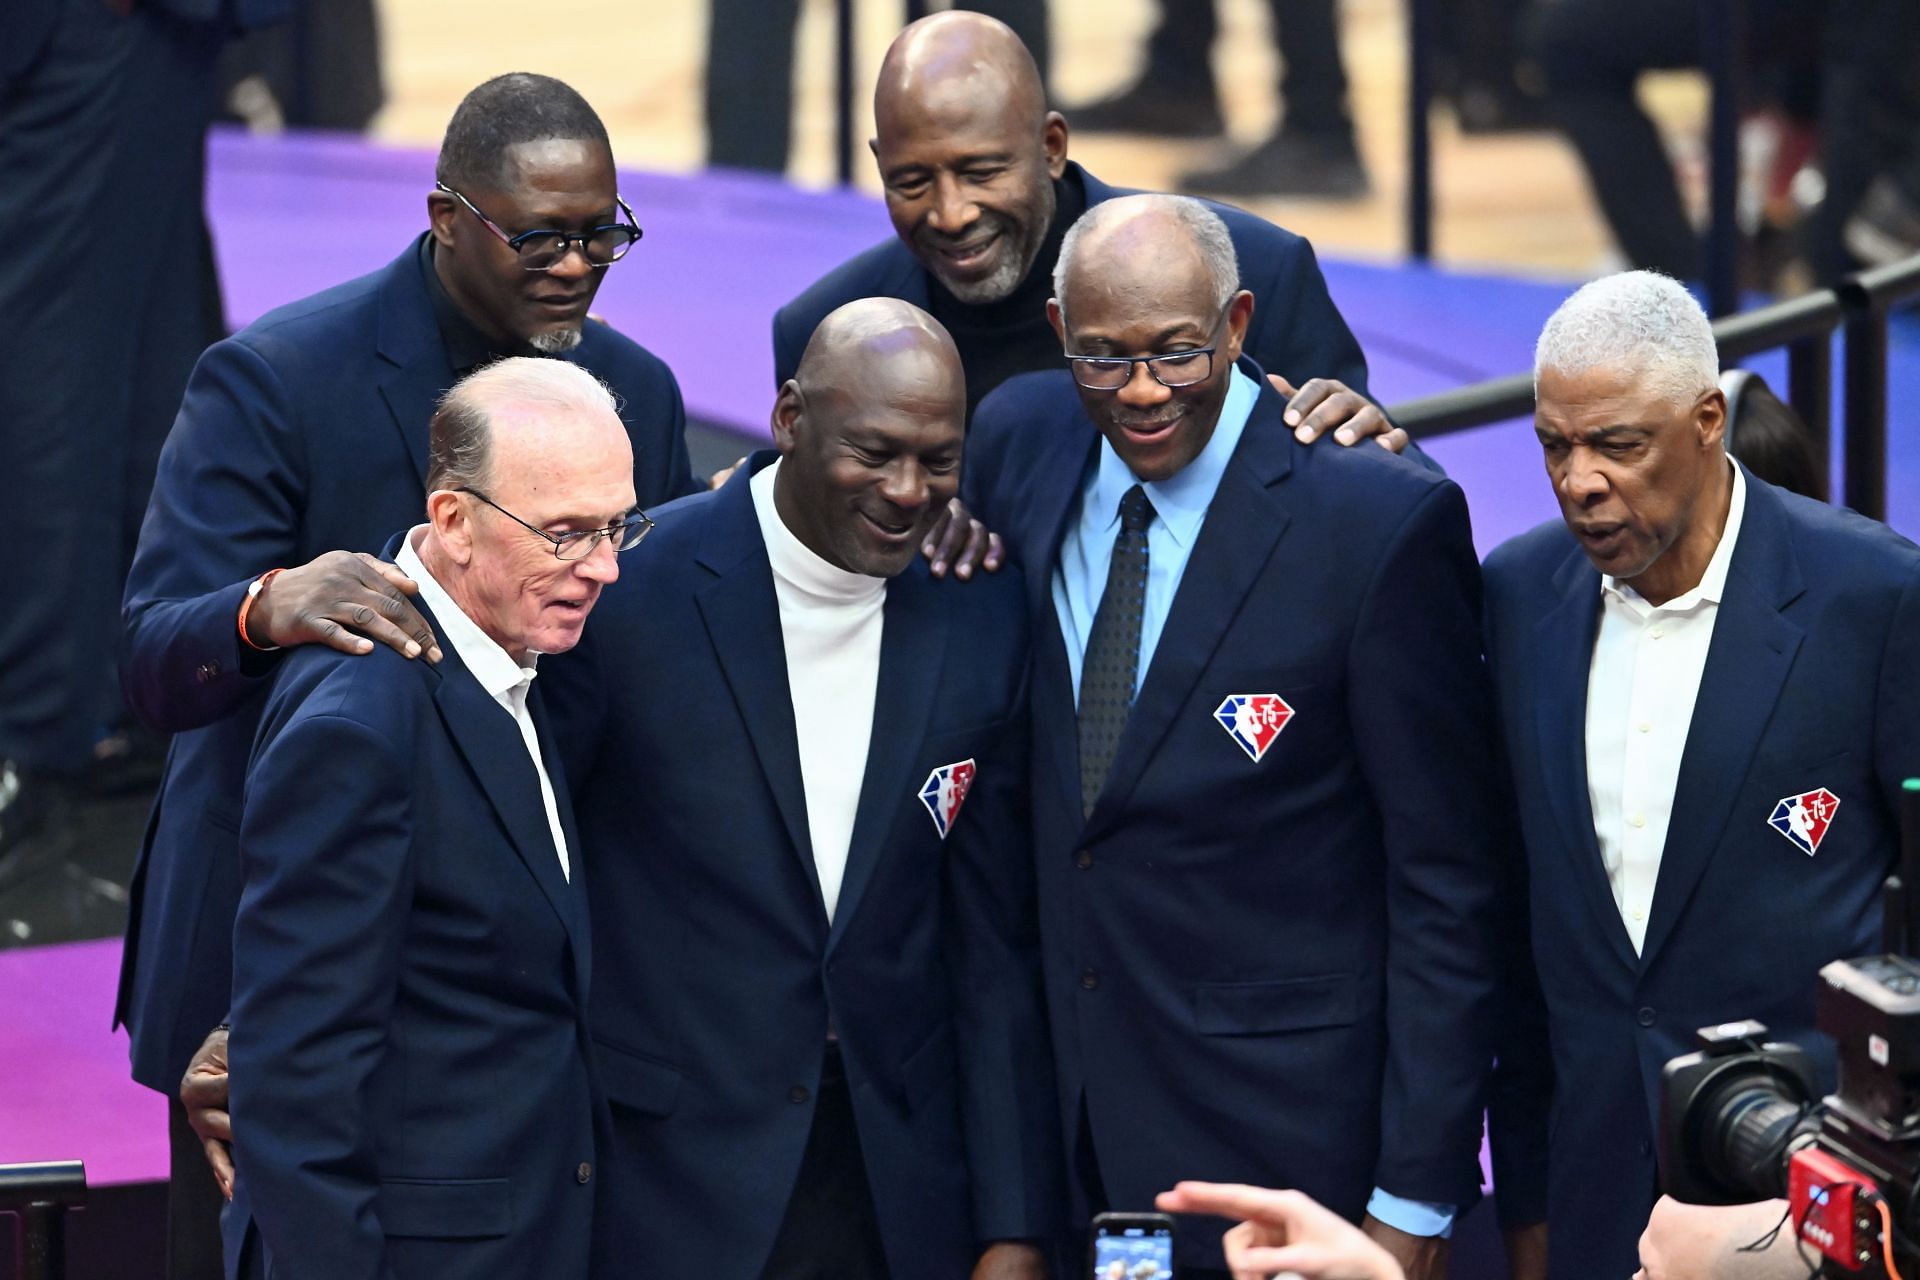 Dominique Wilkins, Michael Jordan, James Worthy, and Bob McAdoo pose for pictures after the introduction of the NBA 75th Anniversary Team